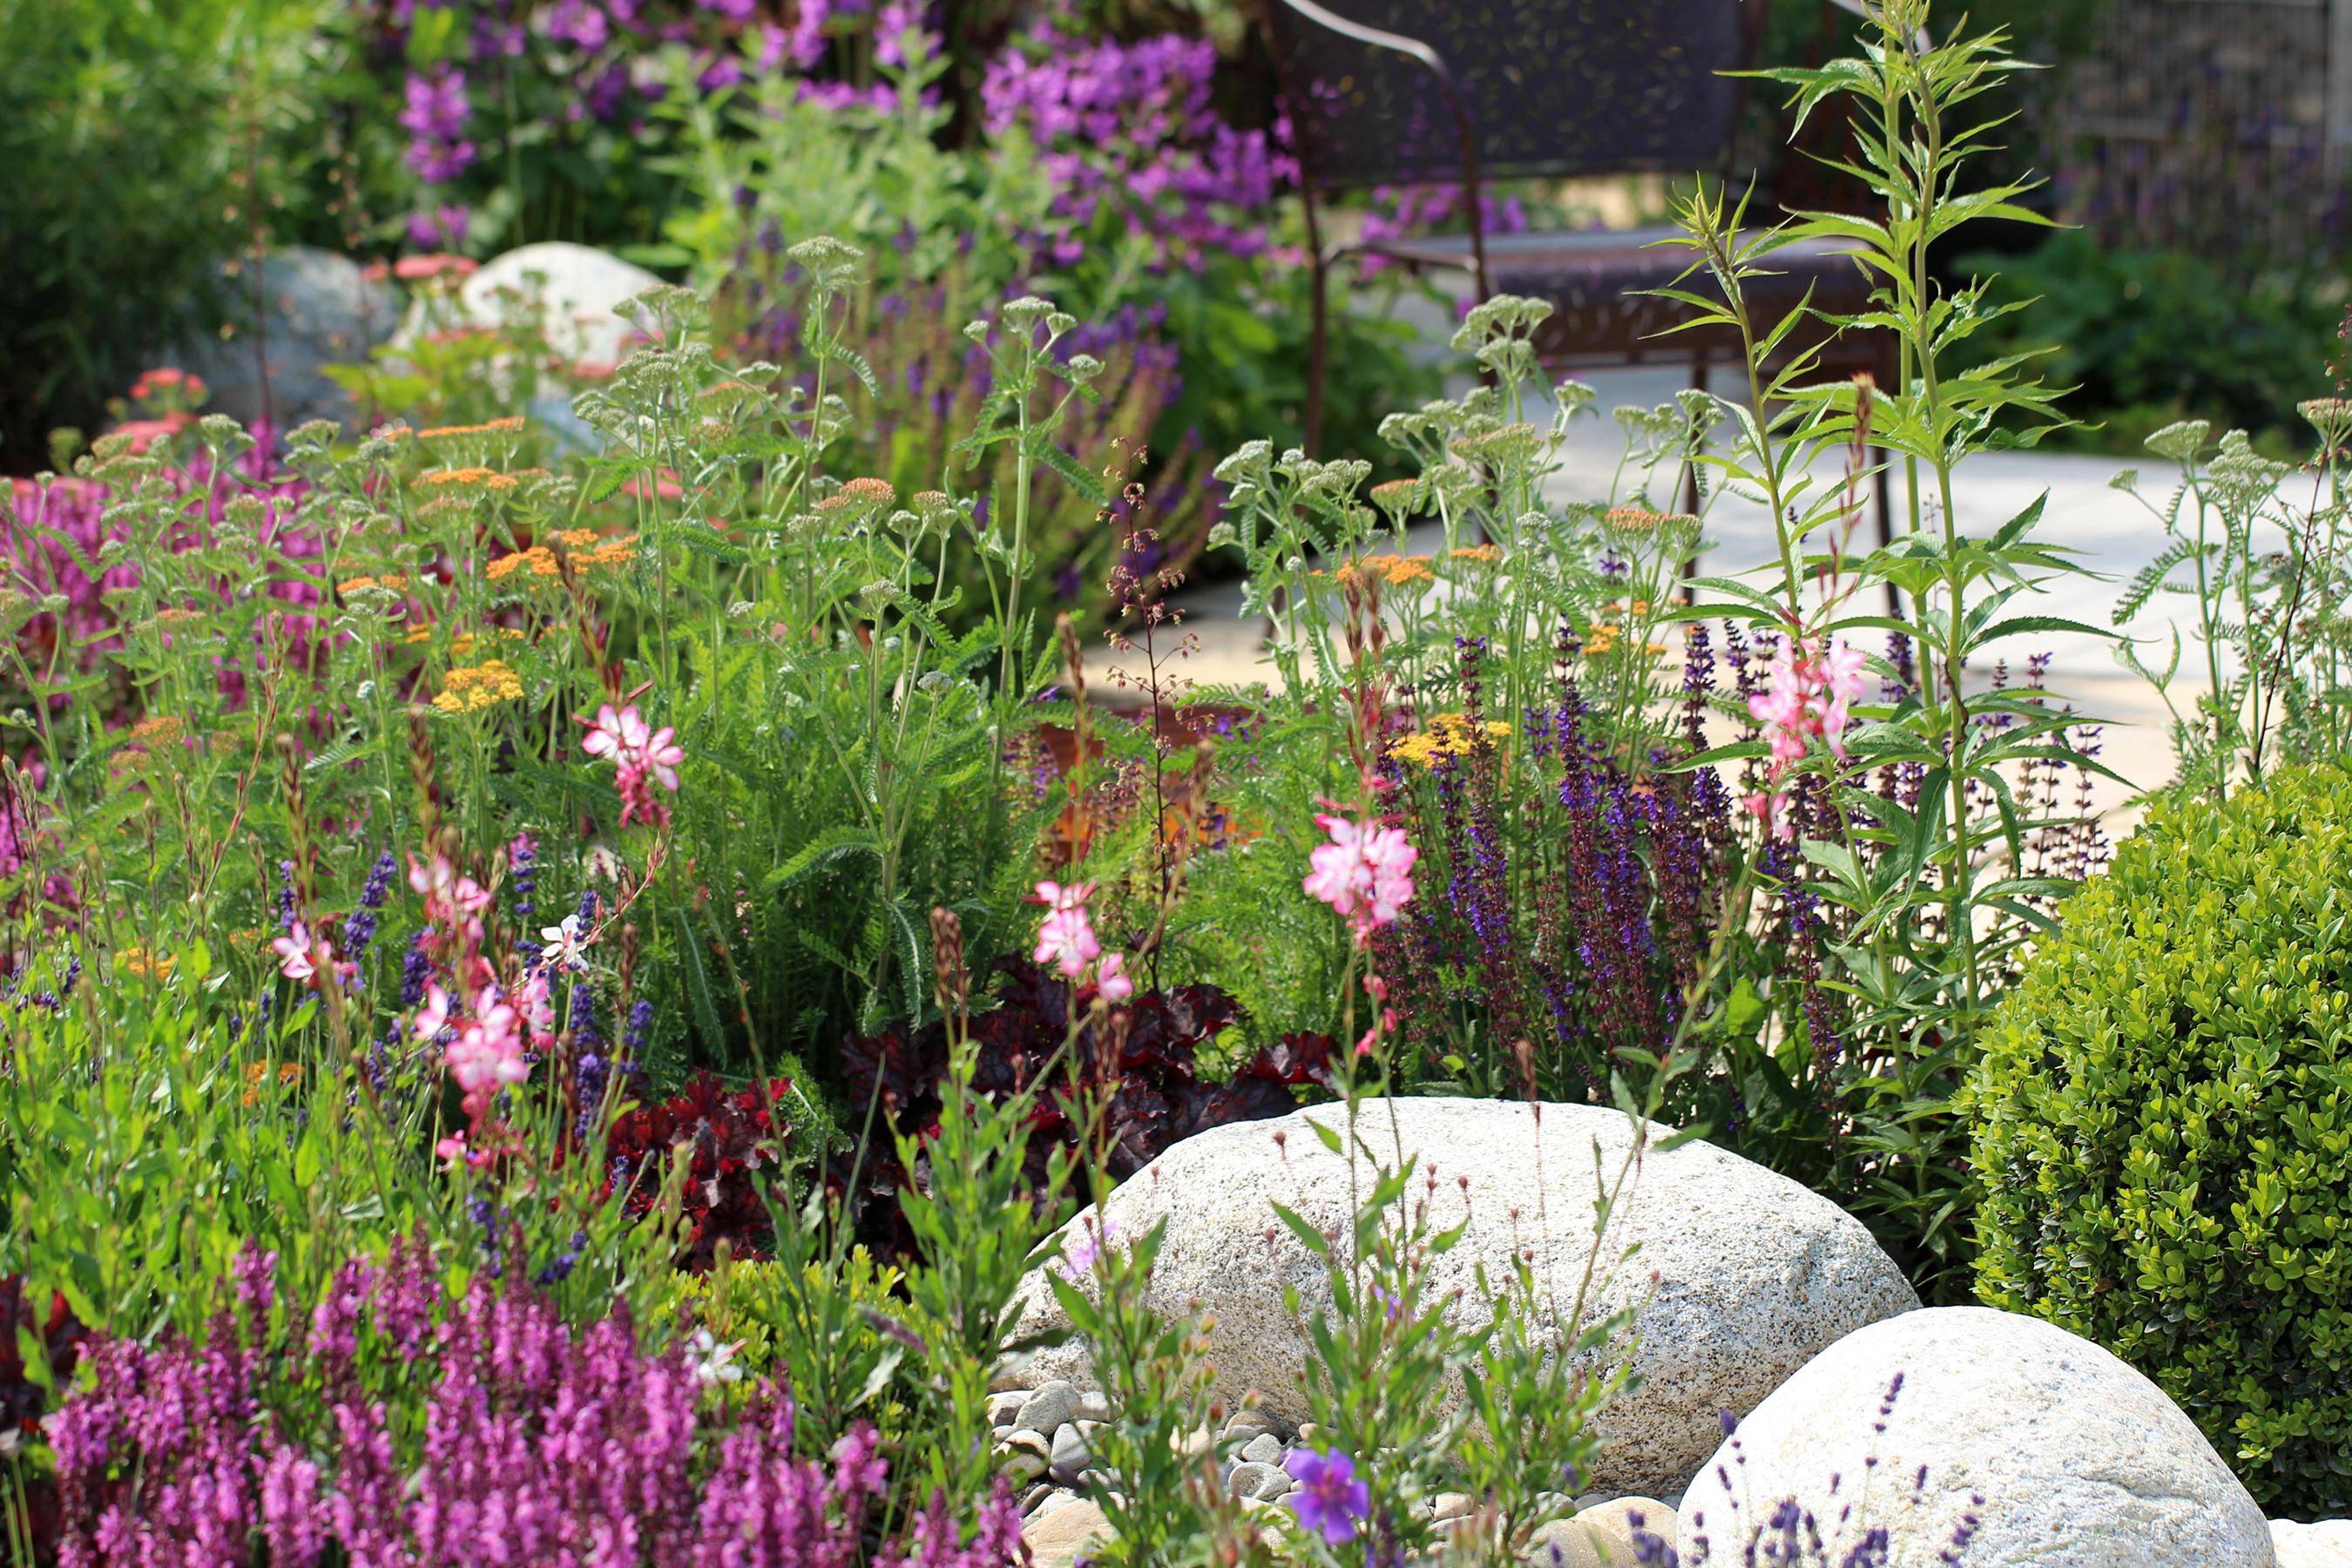 The Rain Garden Is the Smartest Way to Save Water